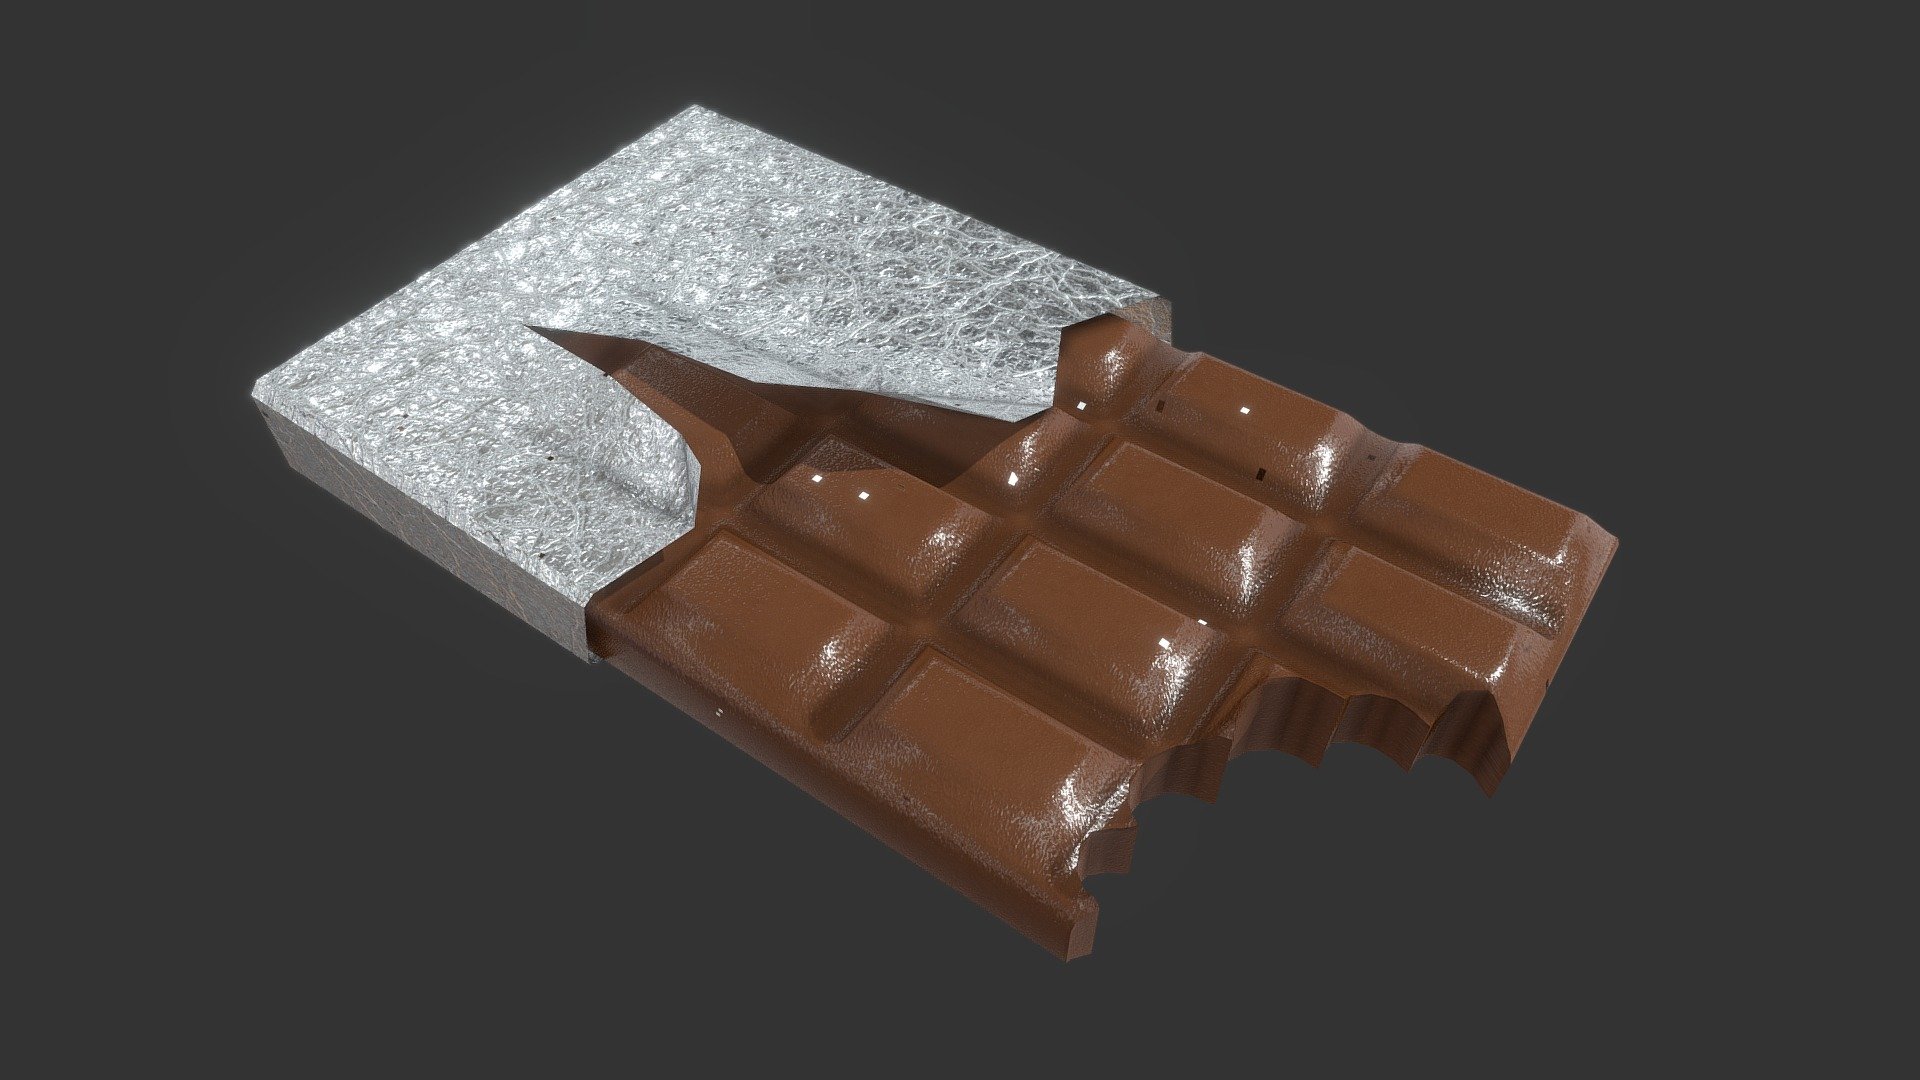 Lowpoly half-eaten chocolate bar with ripped tinfoil wrapper.
Could be on a table in a diner or interior scene 3d model